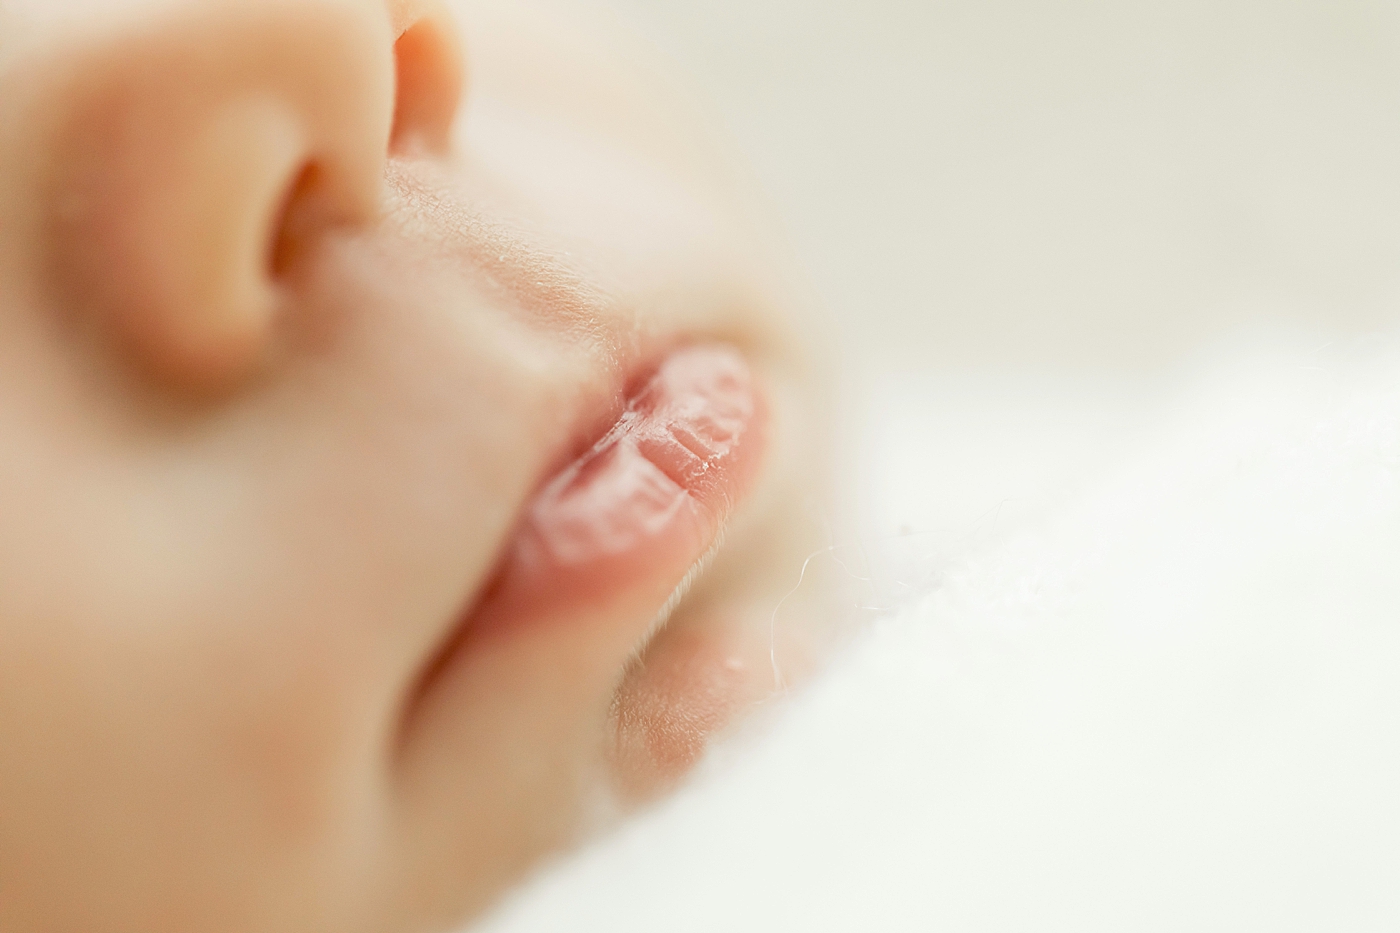 Details of newborn baby lips. Photos by Fresh Light Photography.